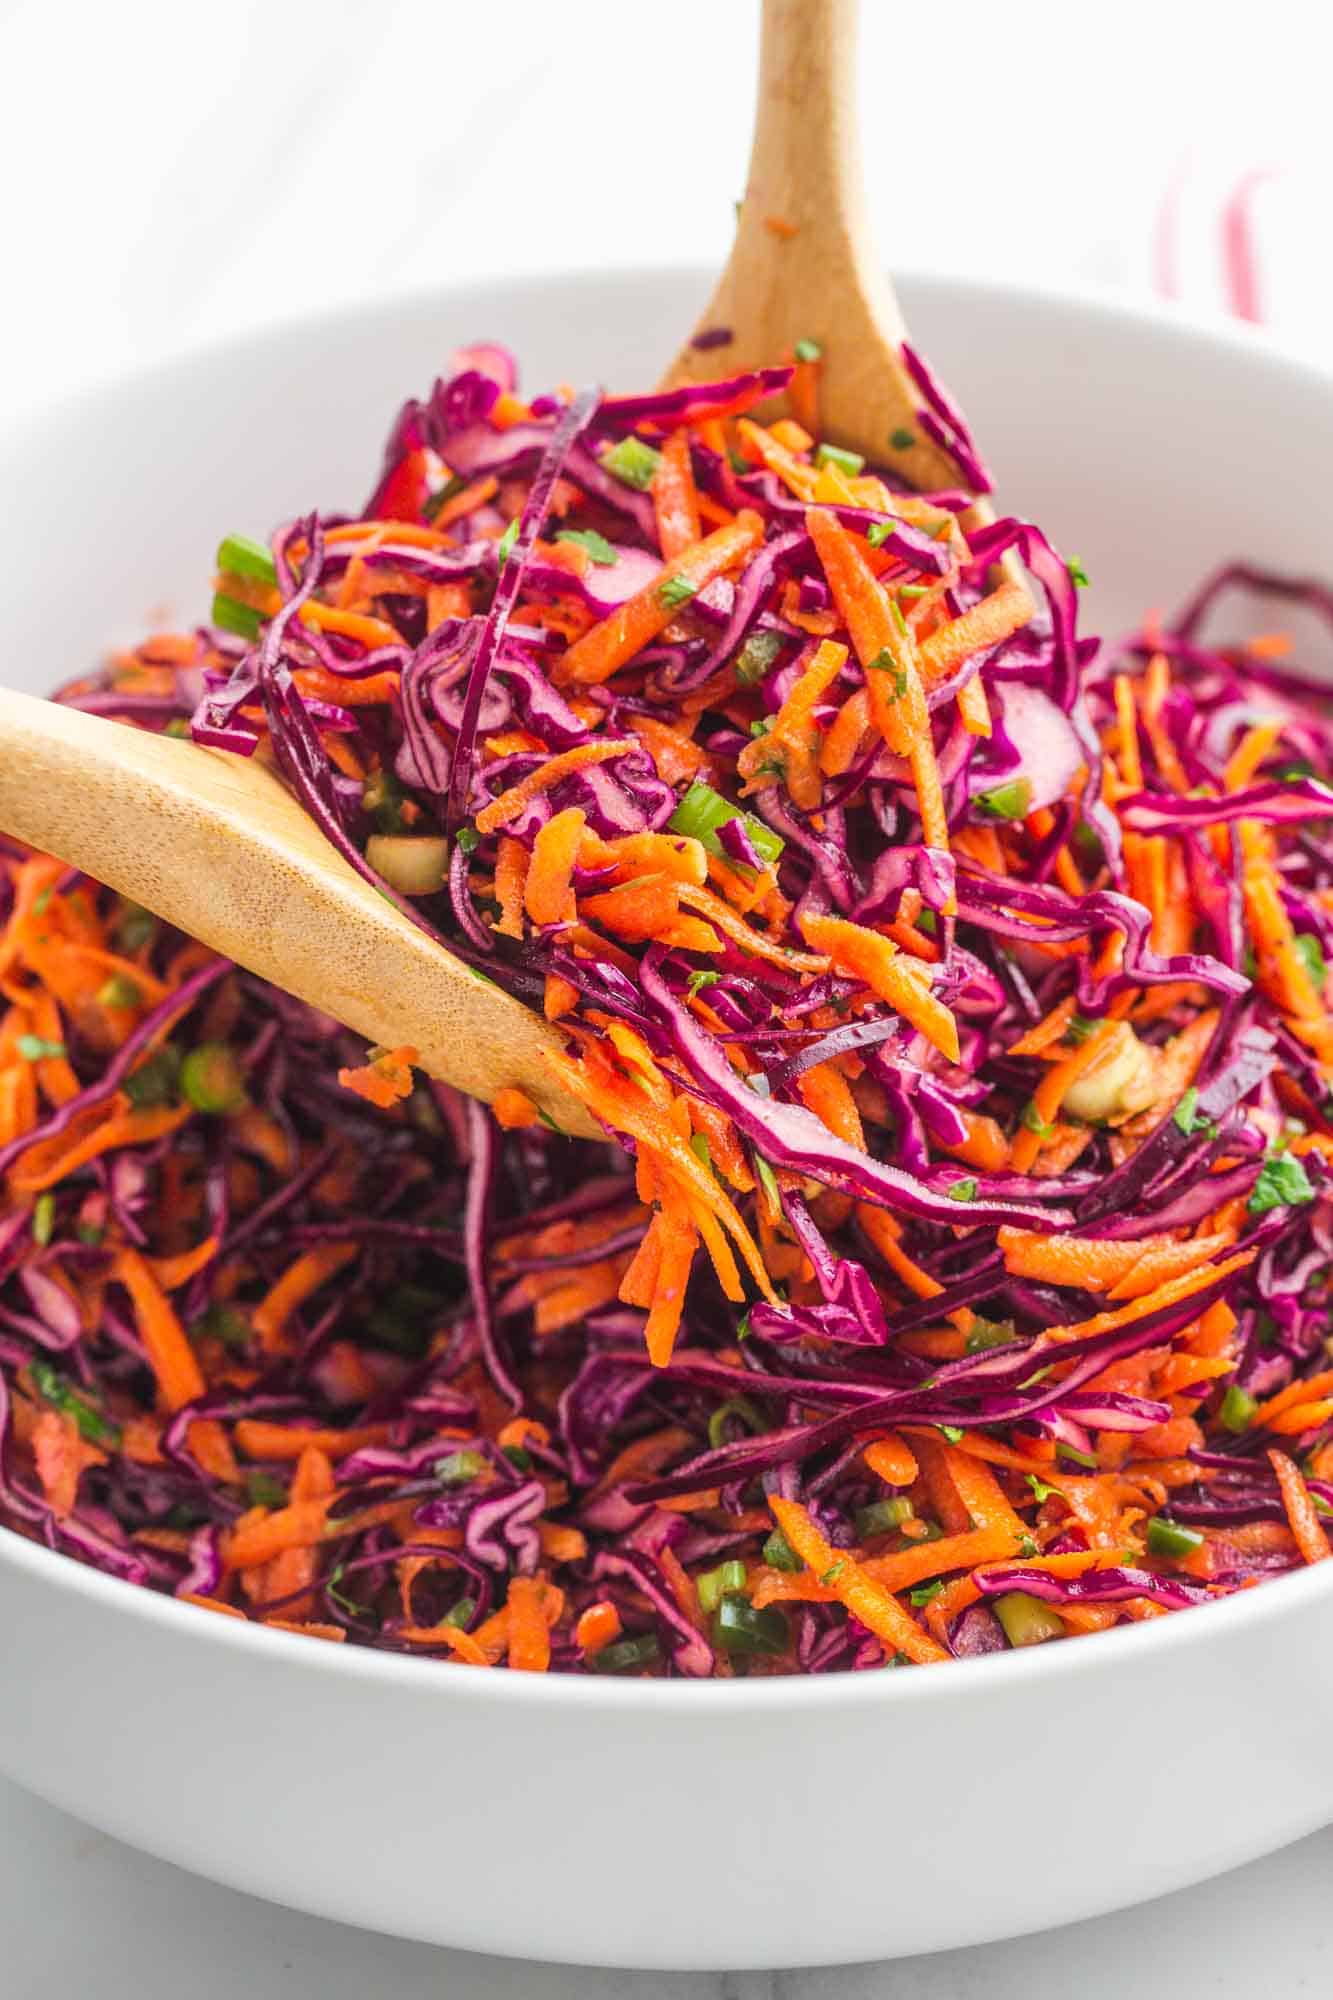 Healthy Red Cabbage Slaw Recipe - Little Sunny Kitchen